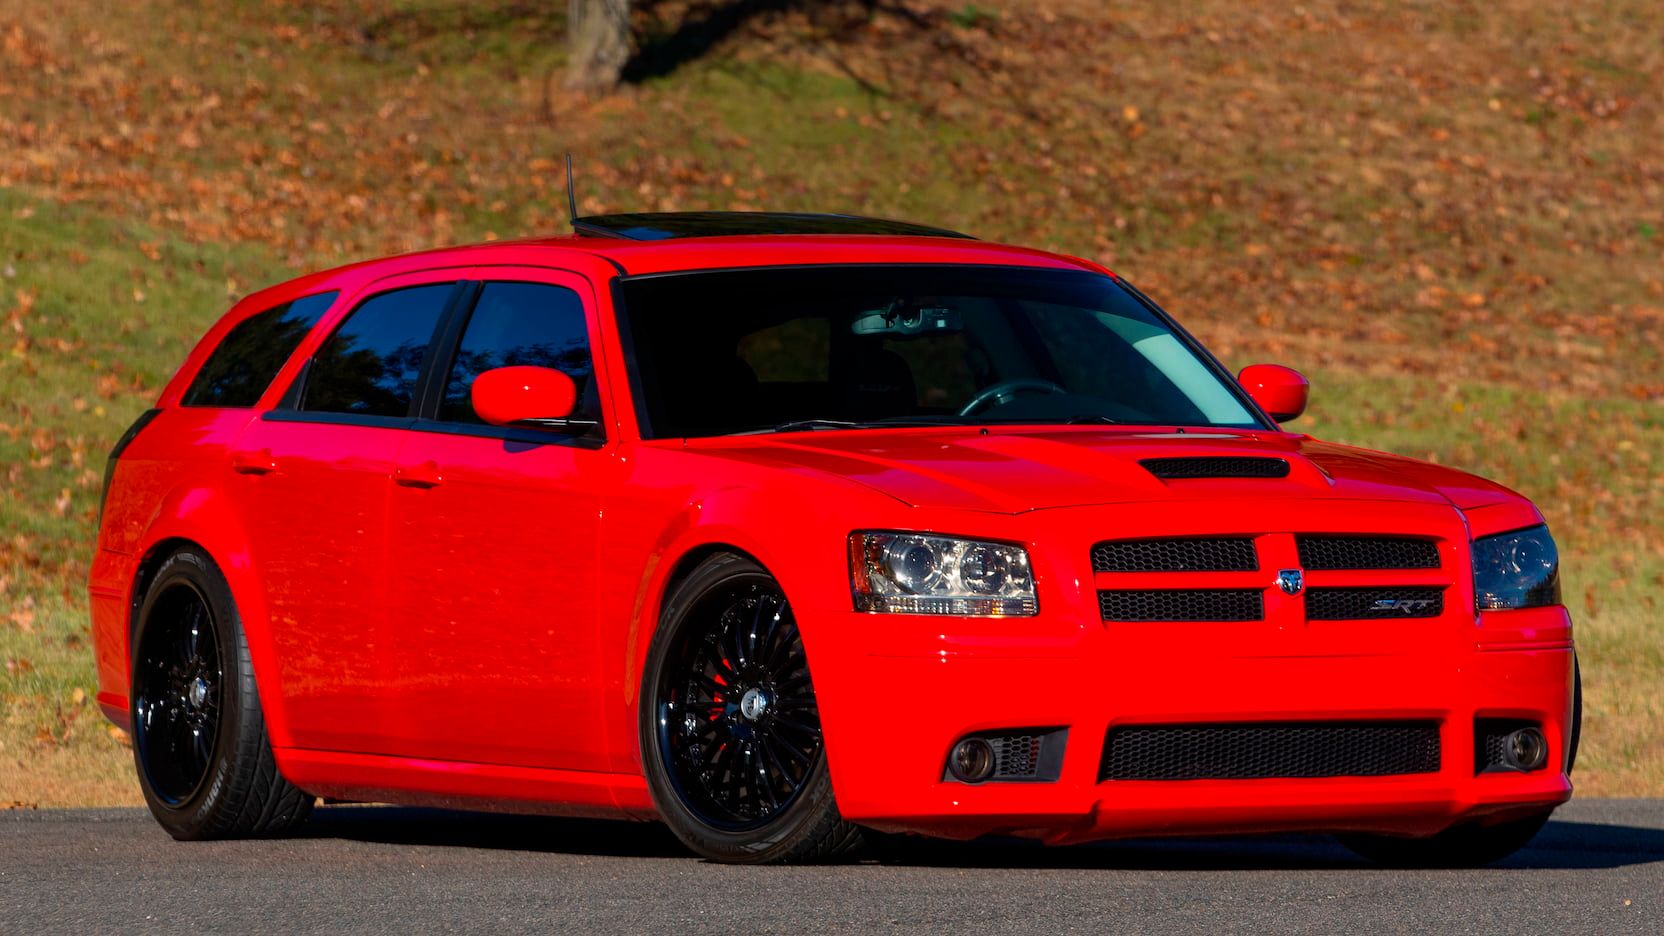 2008 Dodge Magnum SRT-8: The performance car of the 2000s that has been forgotten about.